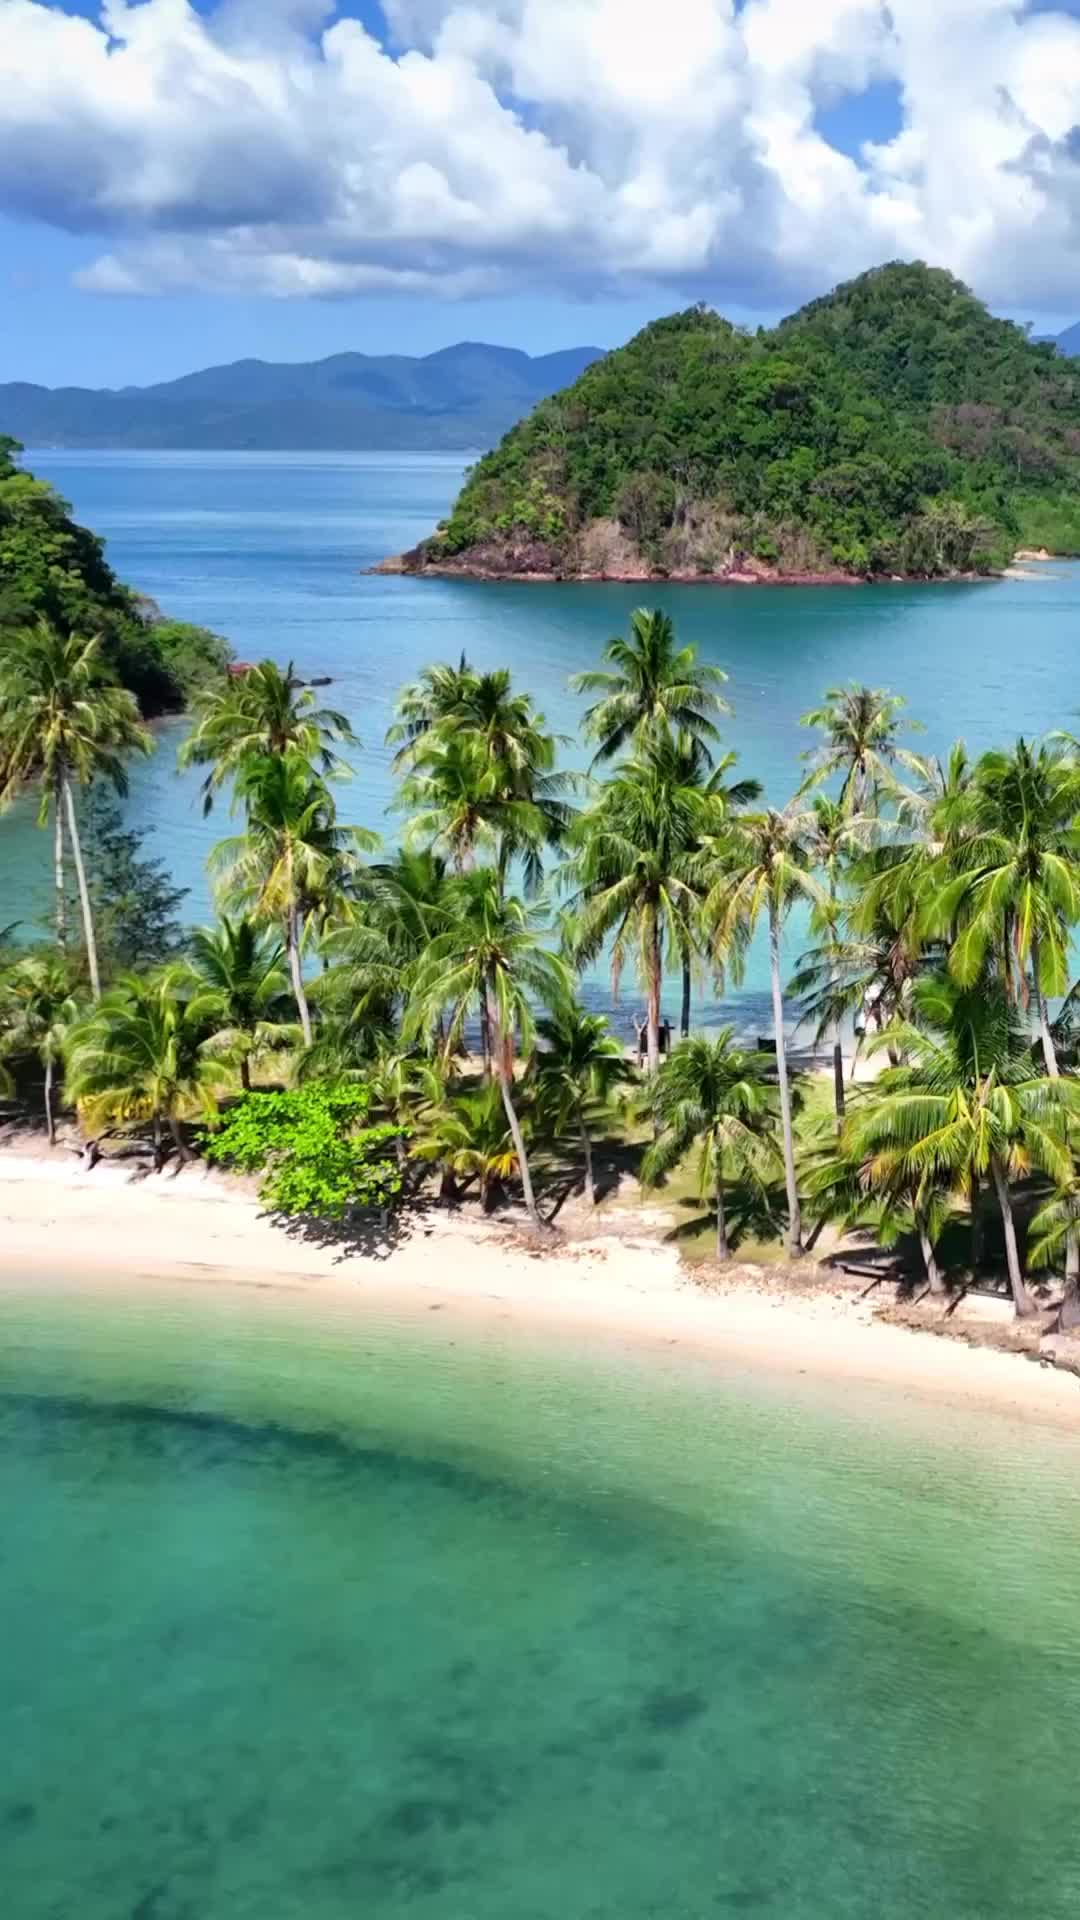 🌴 Hidden Gem Tip: 

Discover the enchanting paradise of Koh Ngam, the island with the breathtaking double beach nestled just south of the larger Koh Chang in east Thailand. 

Escape the crowds and indulge in the serene beauty of this secluded haven. 

Tag someone you’d take here 😍🌊

📸 @florisgone

#sandytoes #beach #foreveronvacation #beachfront #beachplease #traveldestination #saltwatersoul #beautifulplaces #travel #cntraveler #awesomeplaces #kohchang #vacationvibes #thailand